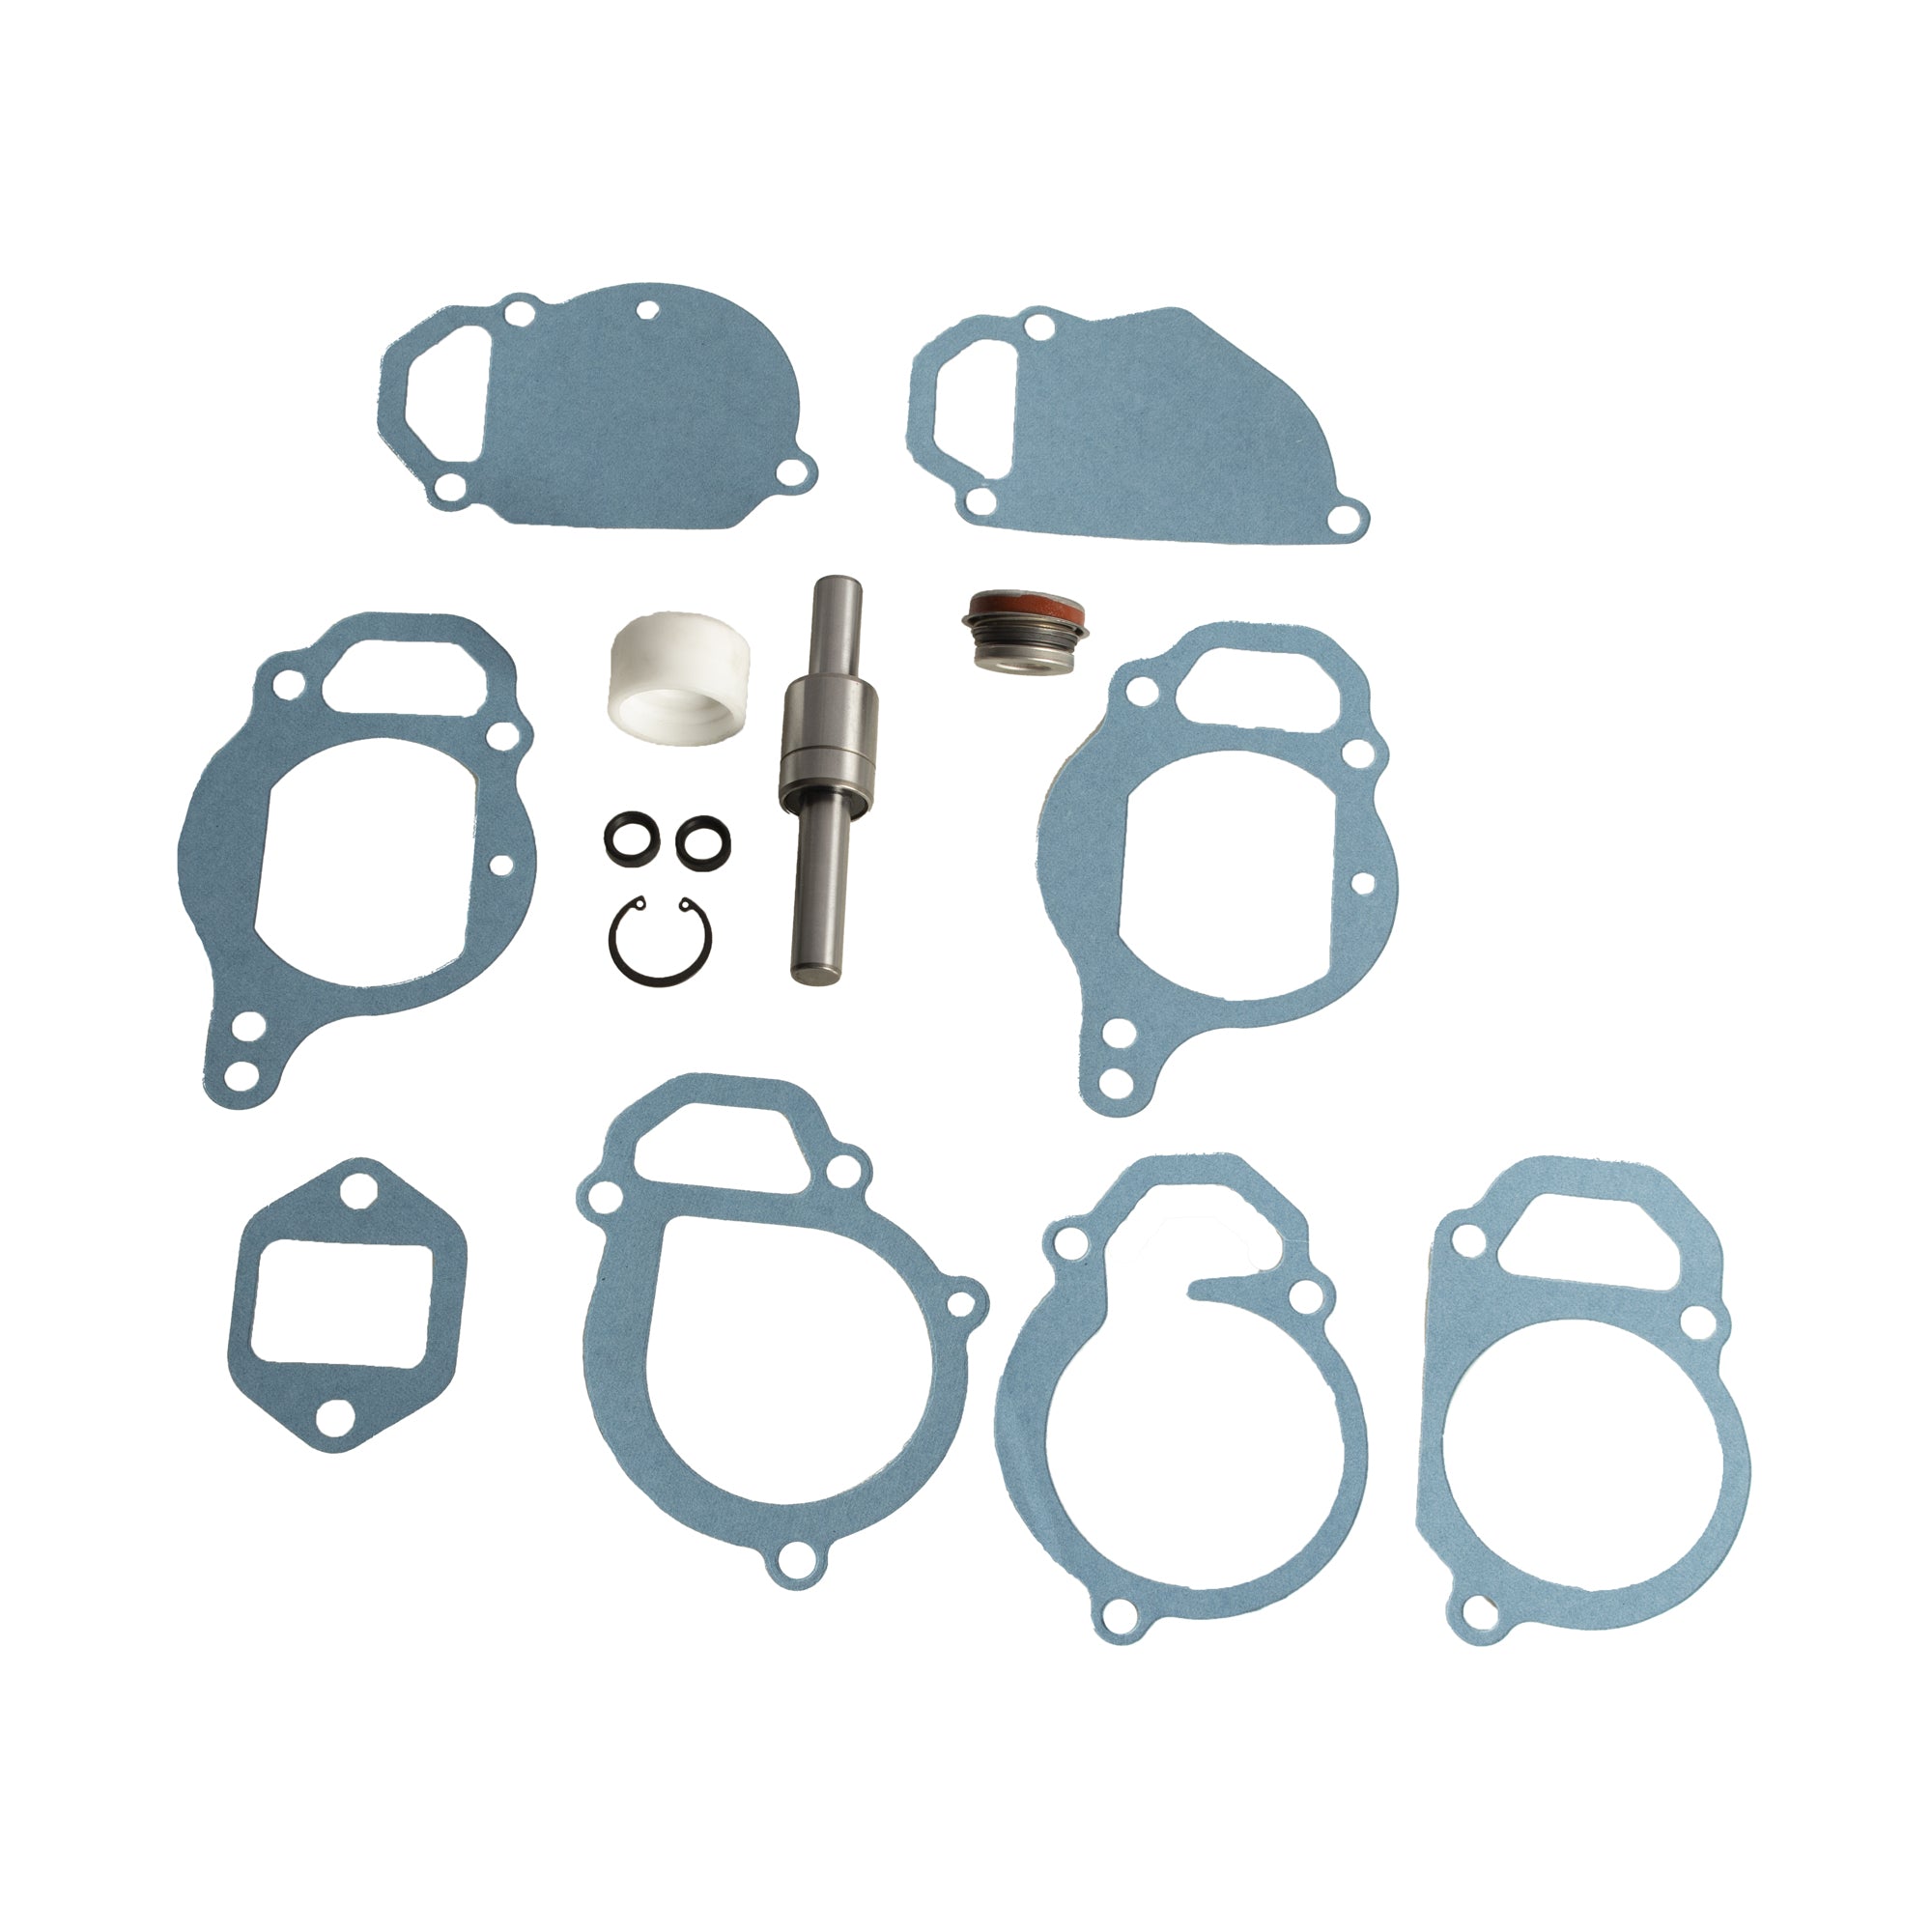 Repair Kit Replacement for Valtra/Valmet;T120,T120C,T120CH,T130  836115971